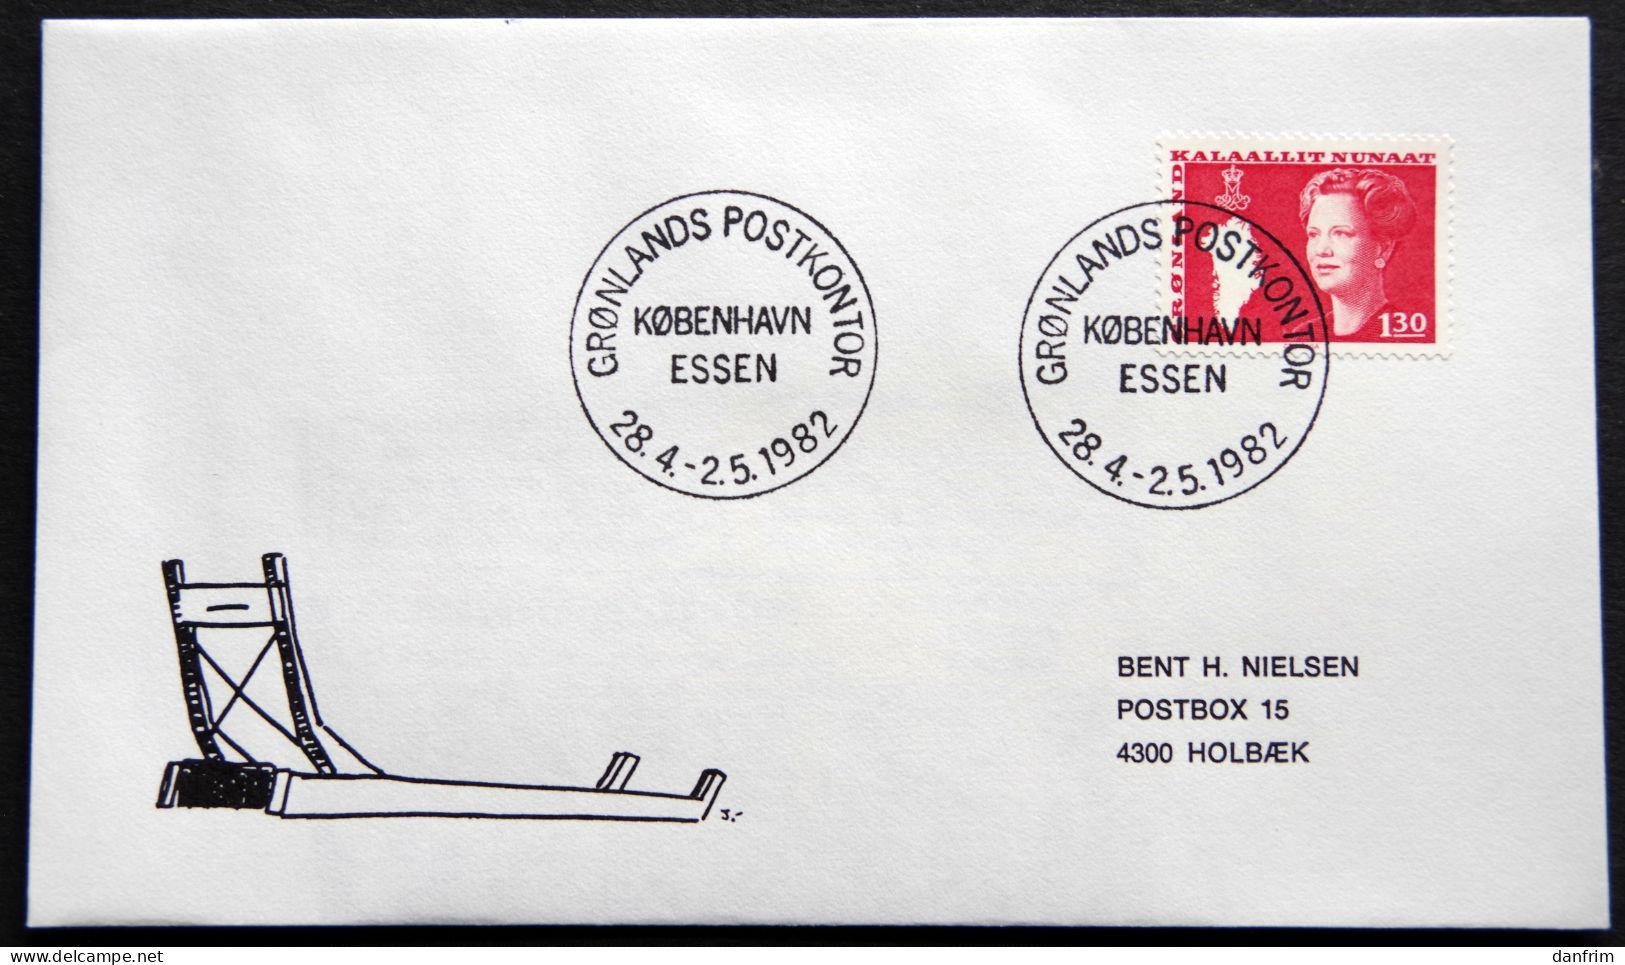 Greenland 1982 SPECIAL POSTMARKS. ESSEN 28.4-2.5. 1982 ( Lot 929) - Lettres & Documents